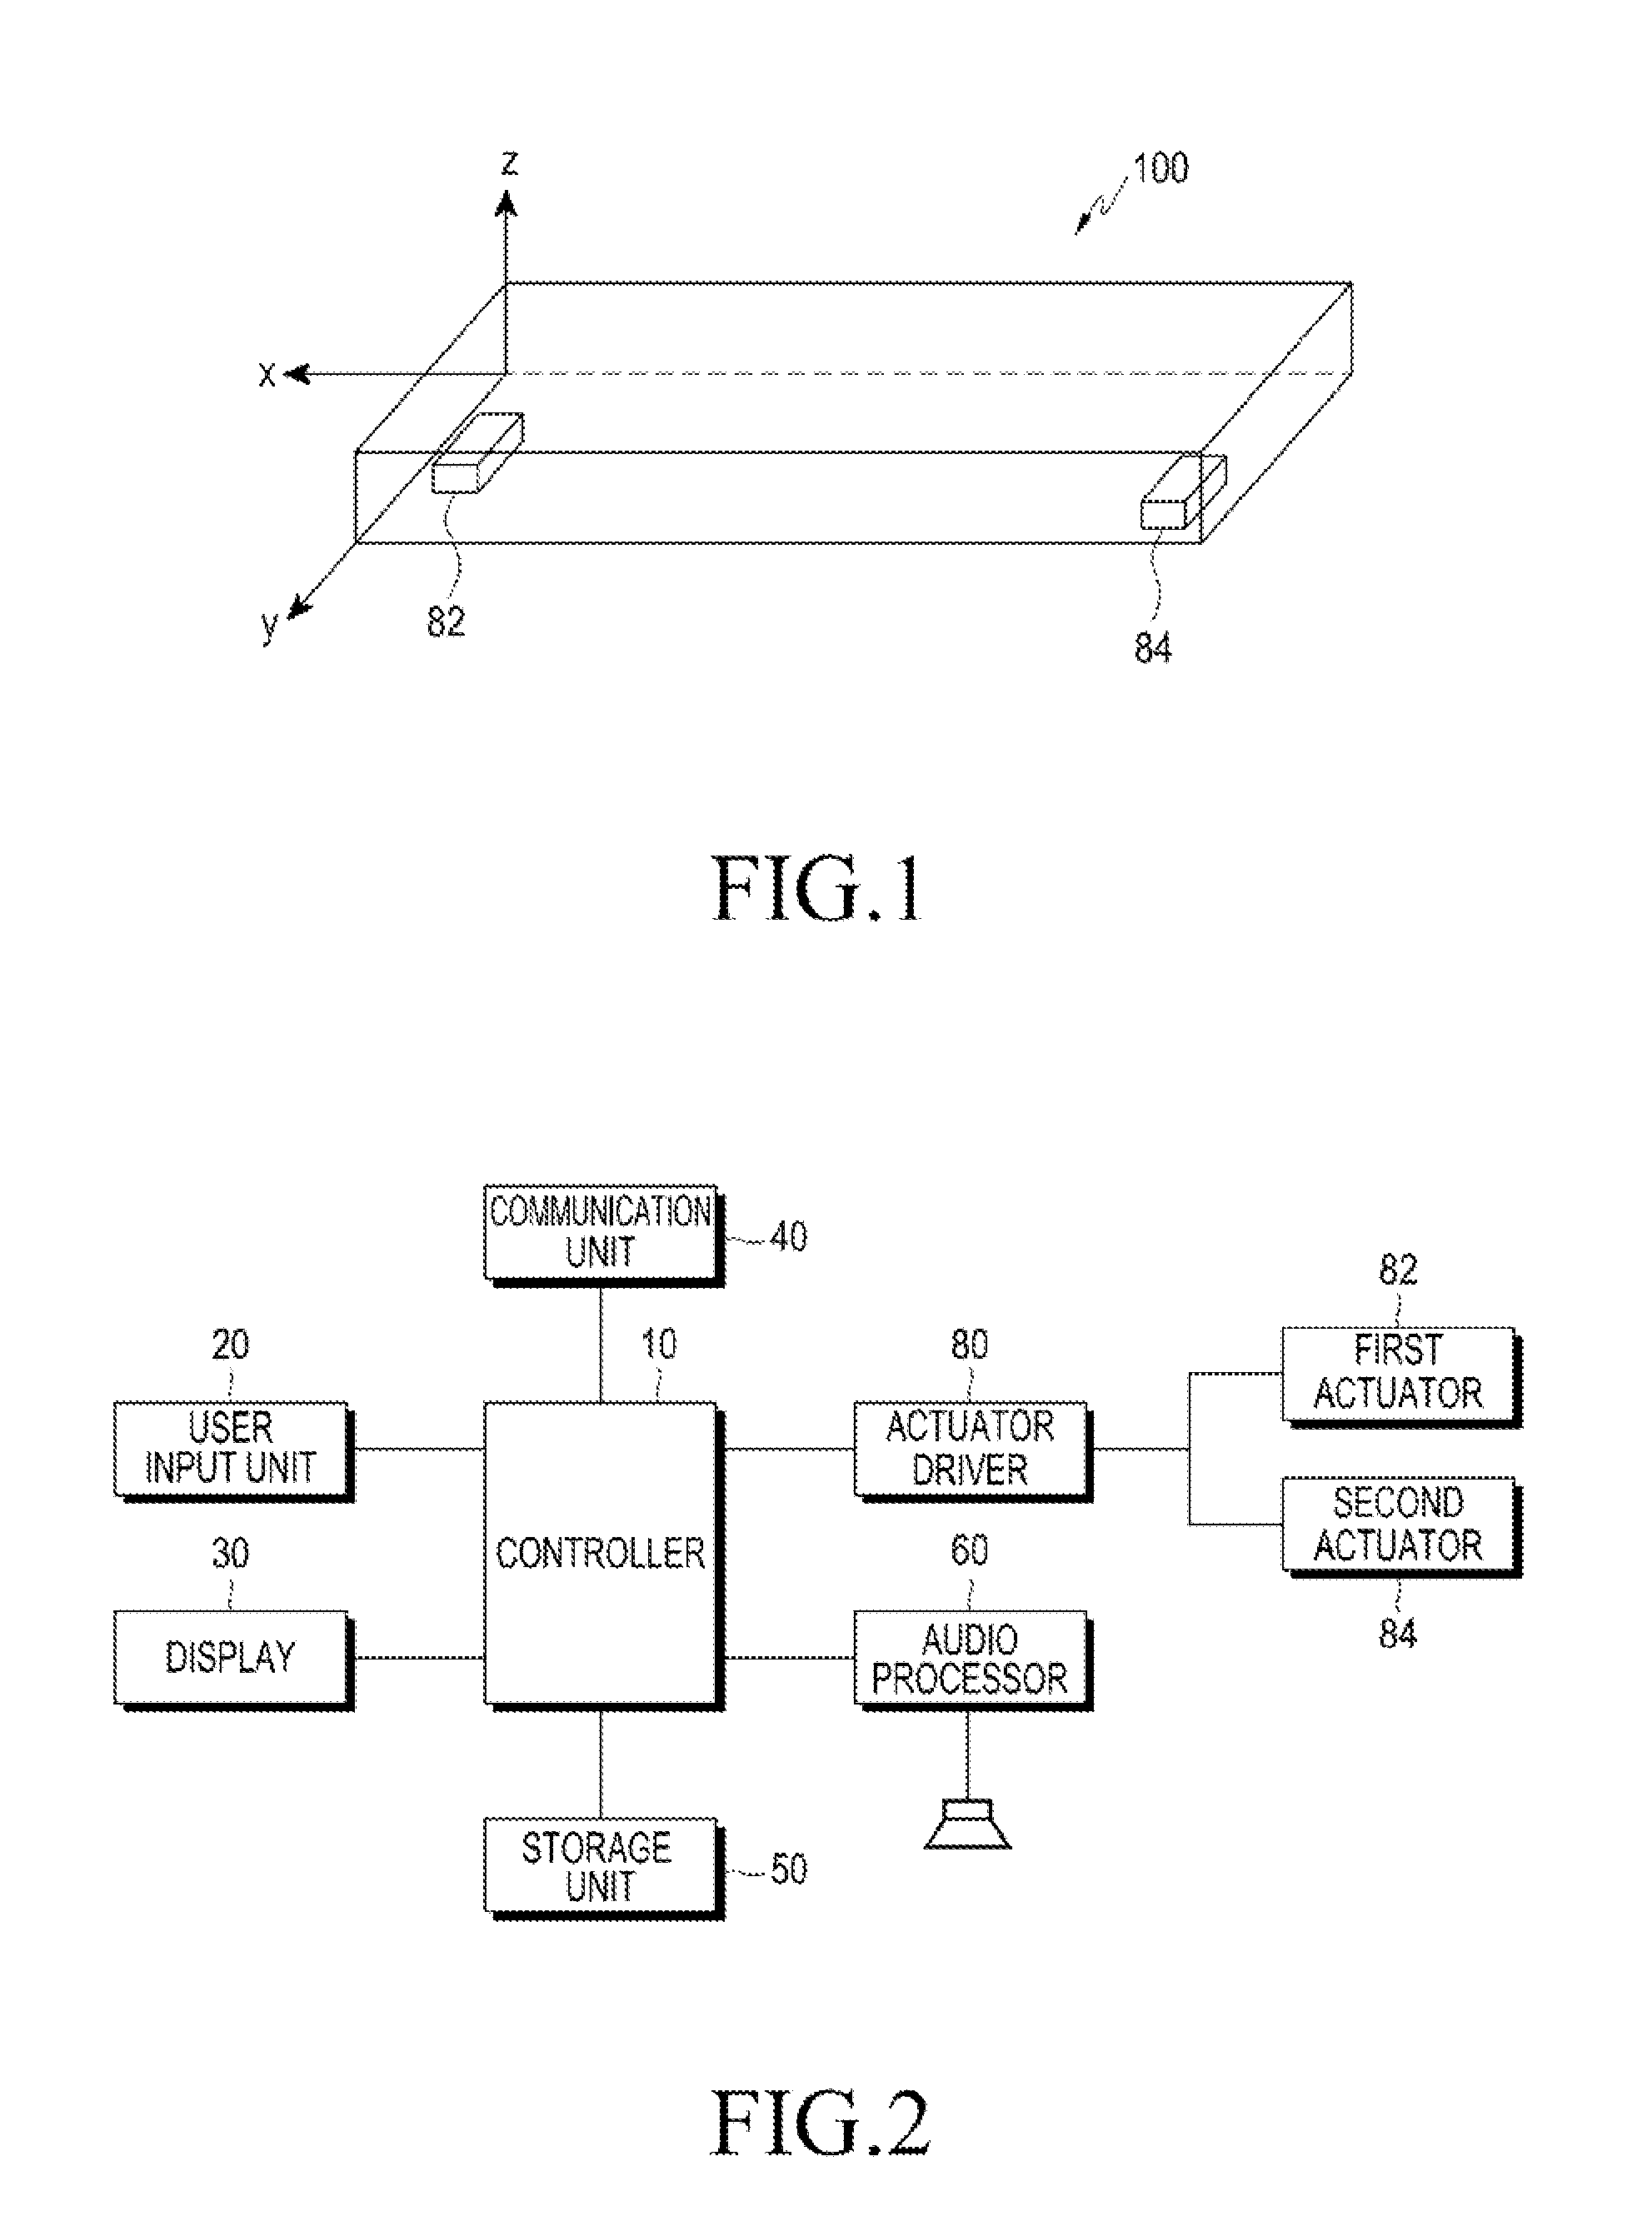 Apparatus and method for generating vibration based on sound characteristics